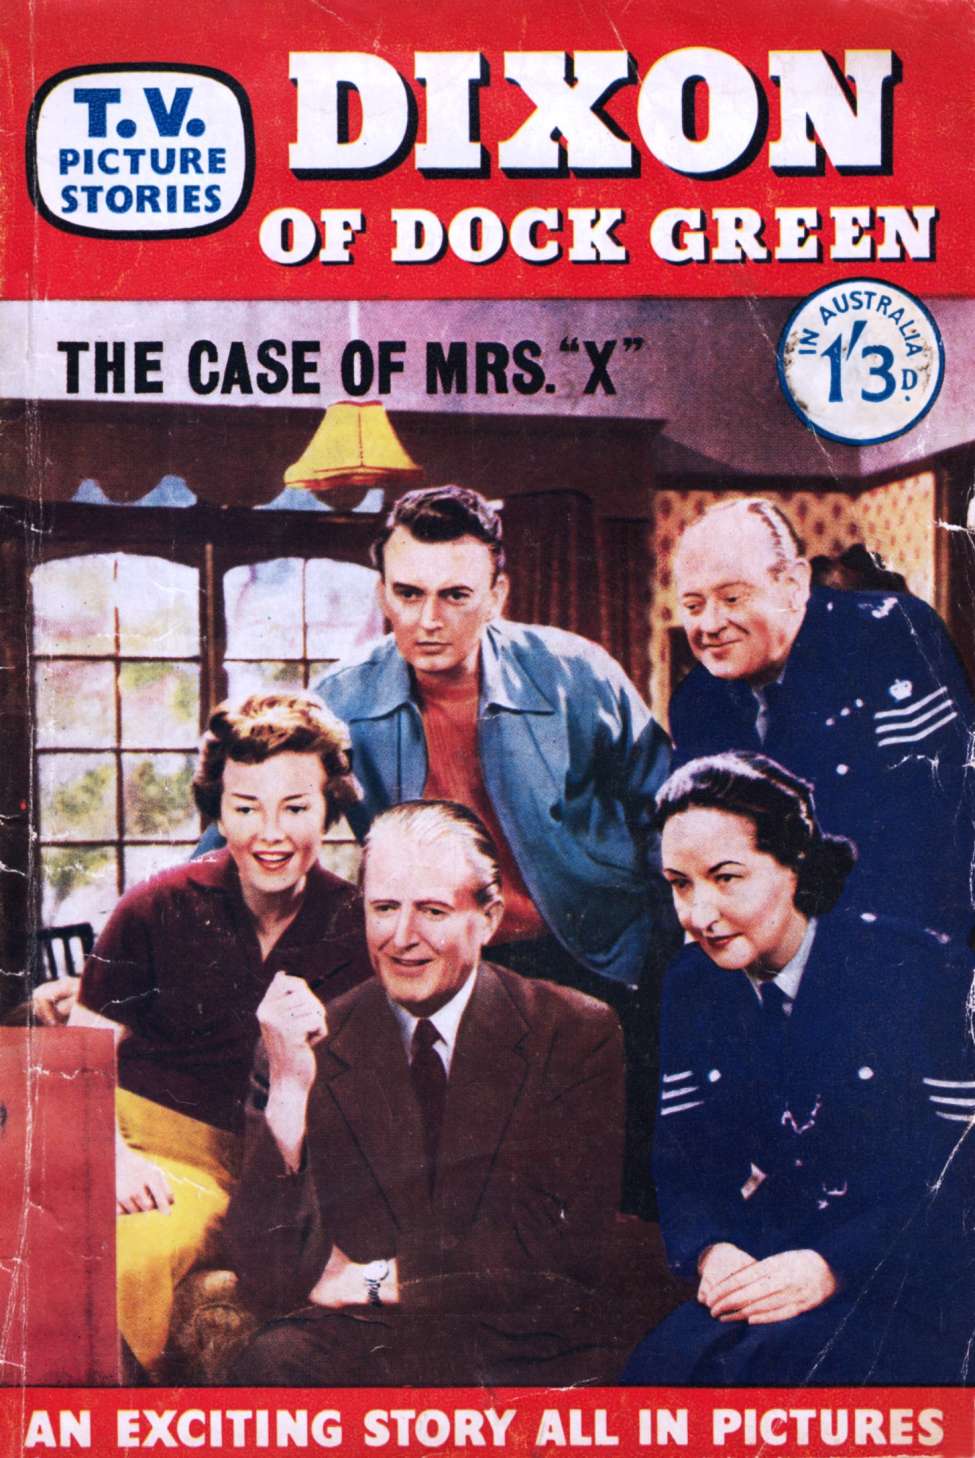 Book Cover For T.V. Picture Stories 36 - Dixon Of Dock Green - The Case Of Mrs. "X"